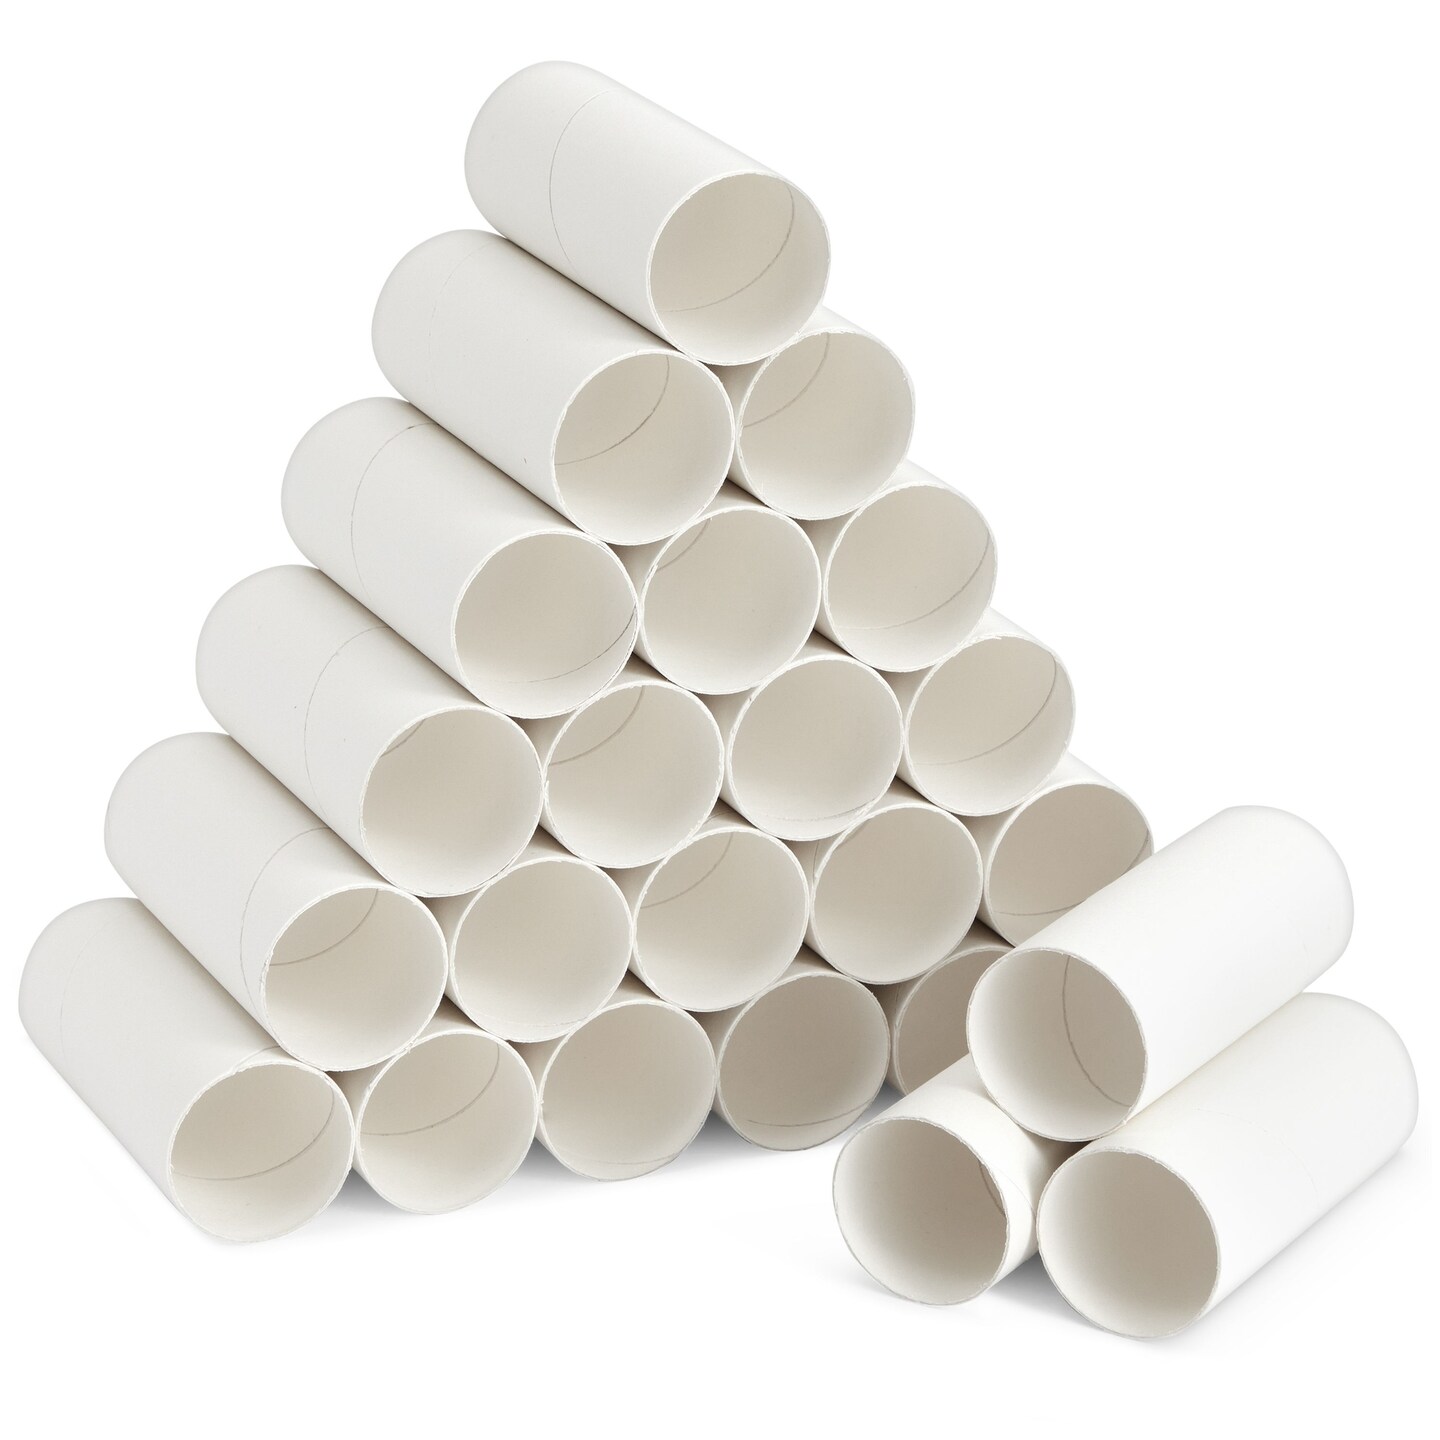 24 Pack Cardboard Tubes for Crafts, Empty Toilet Paper Rolls for